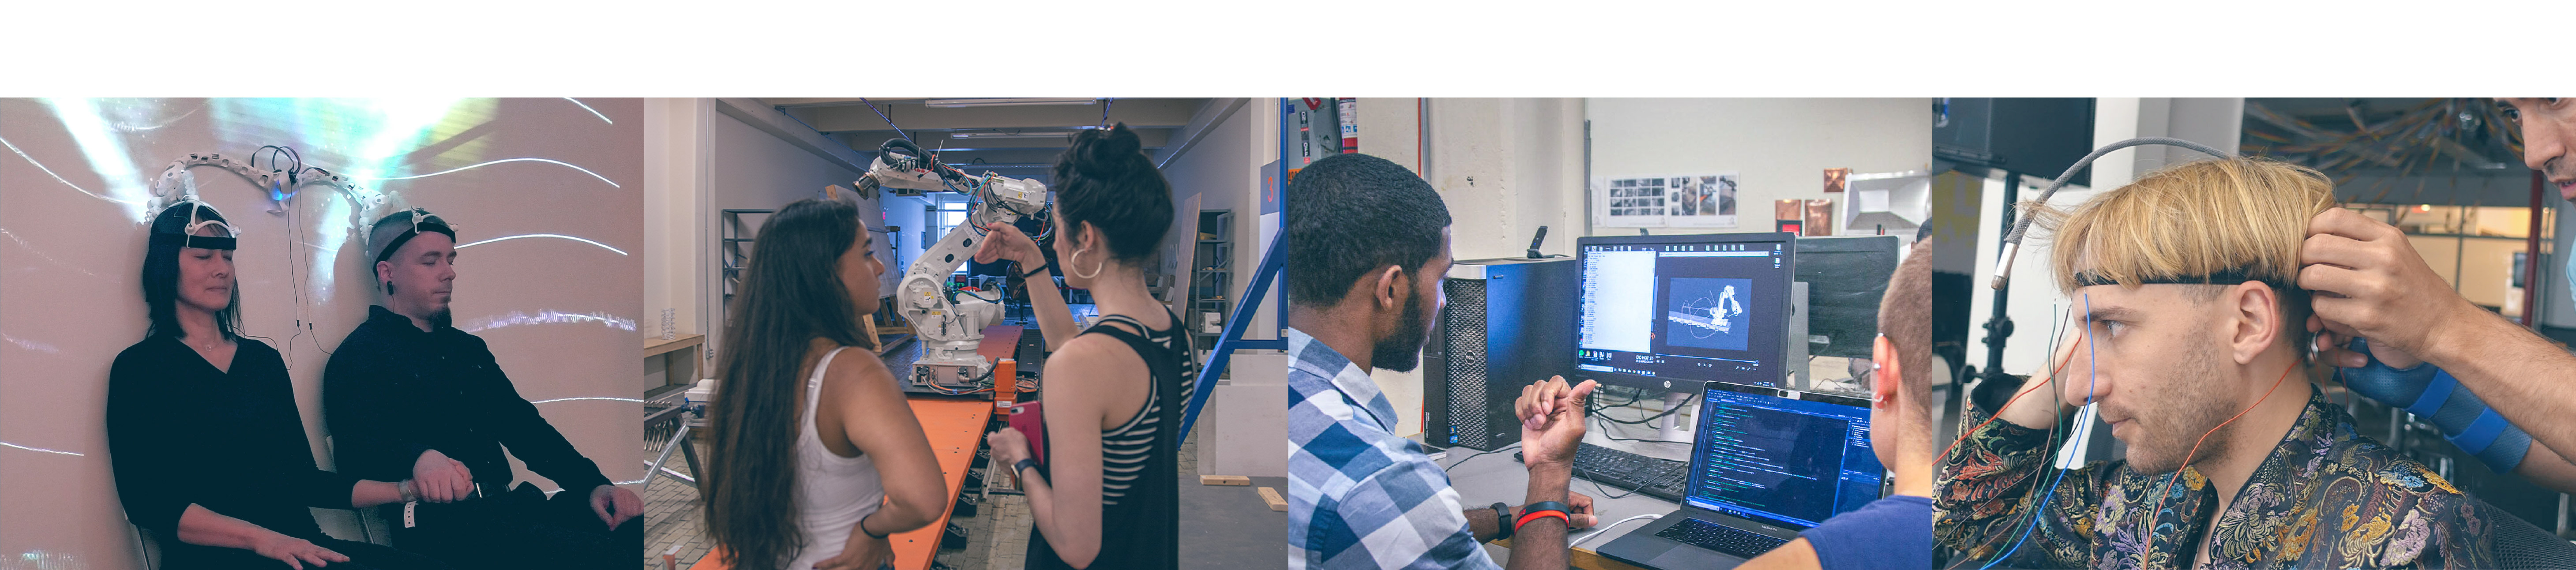 Collage of four images from Thoughtworks Arts projects with people interacting with head gears, robots and coding